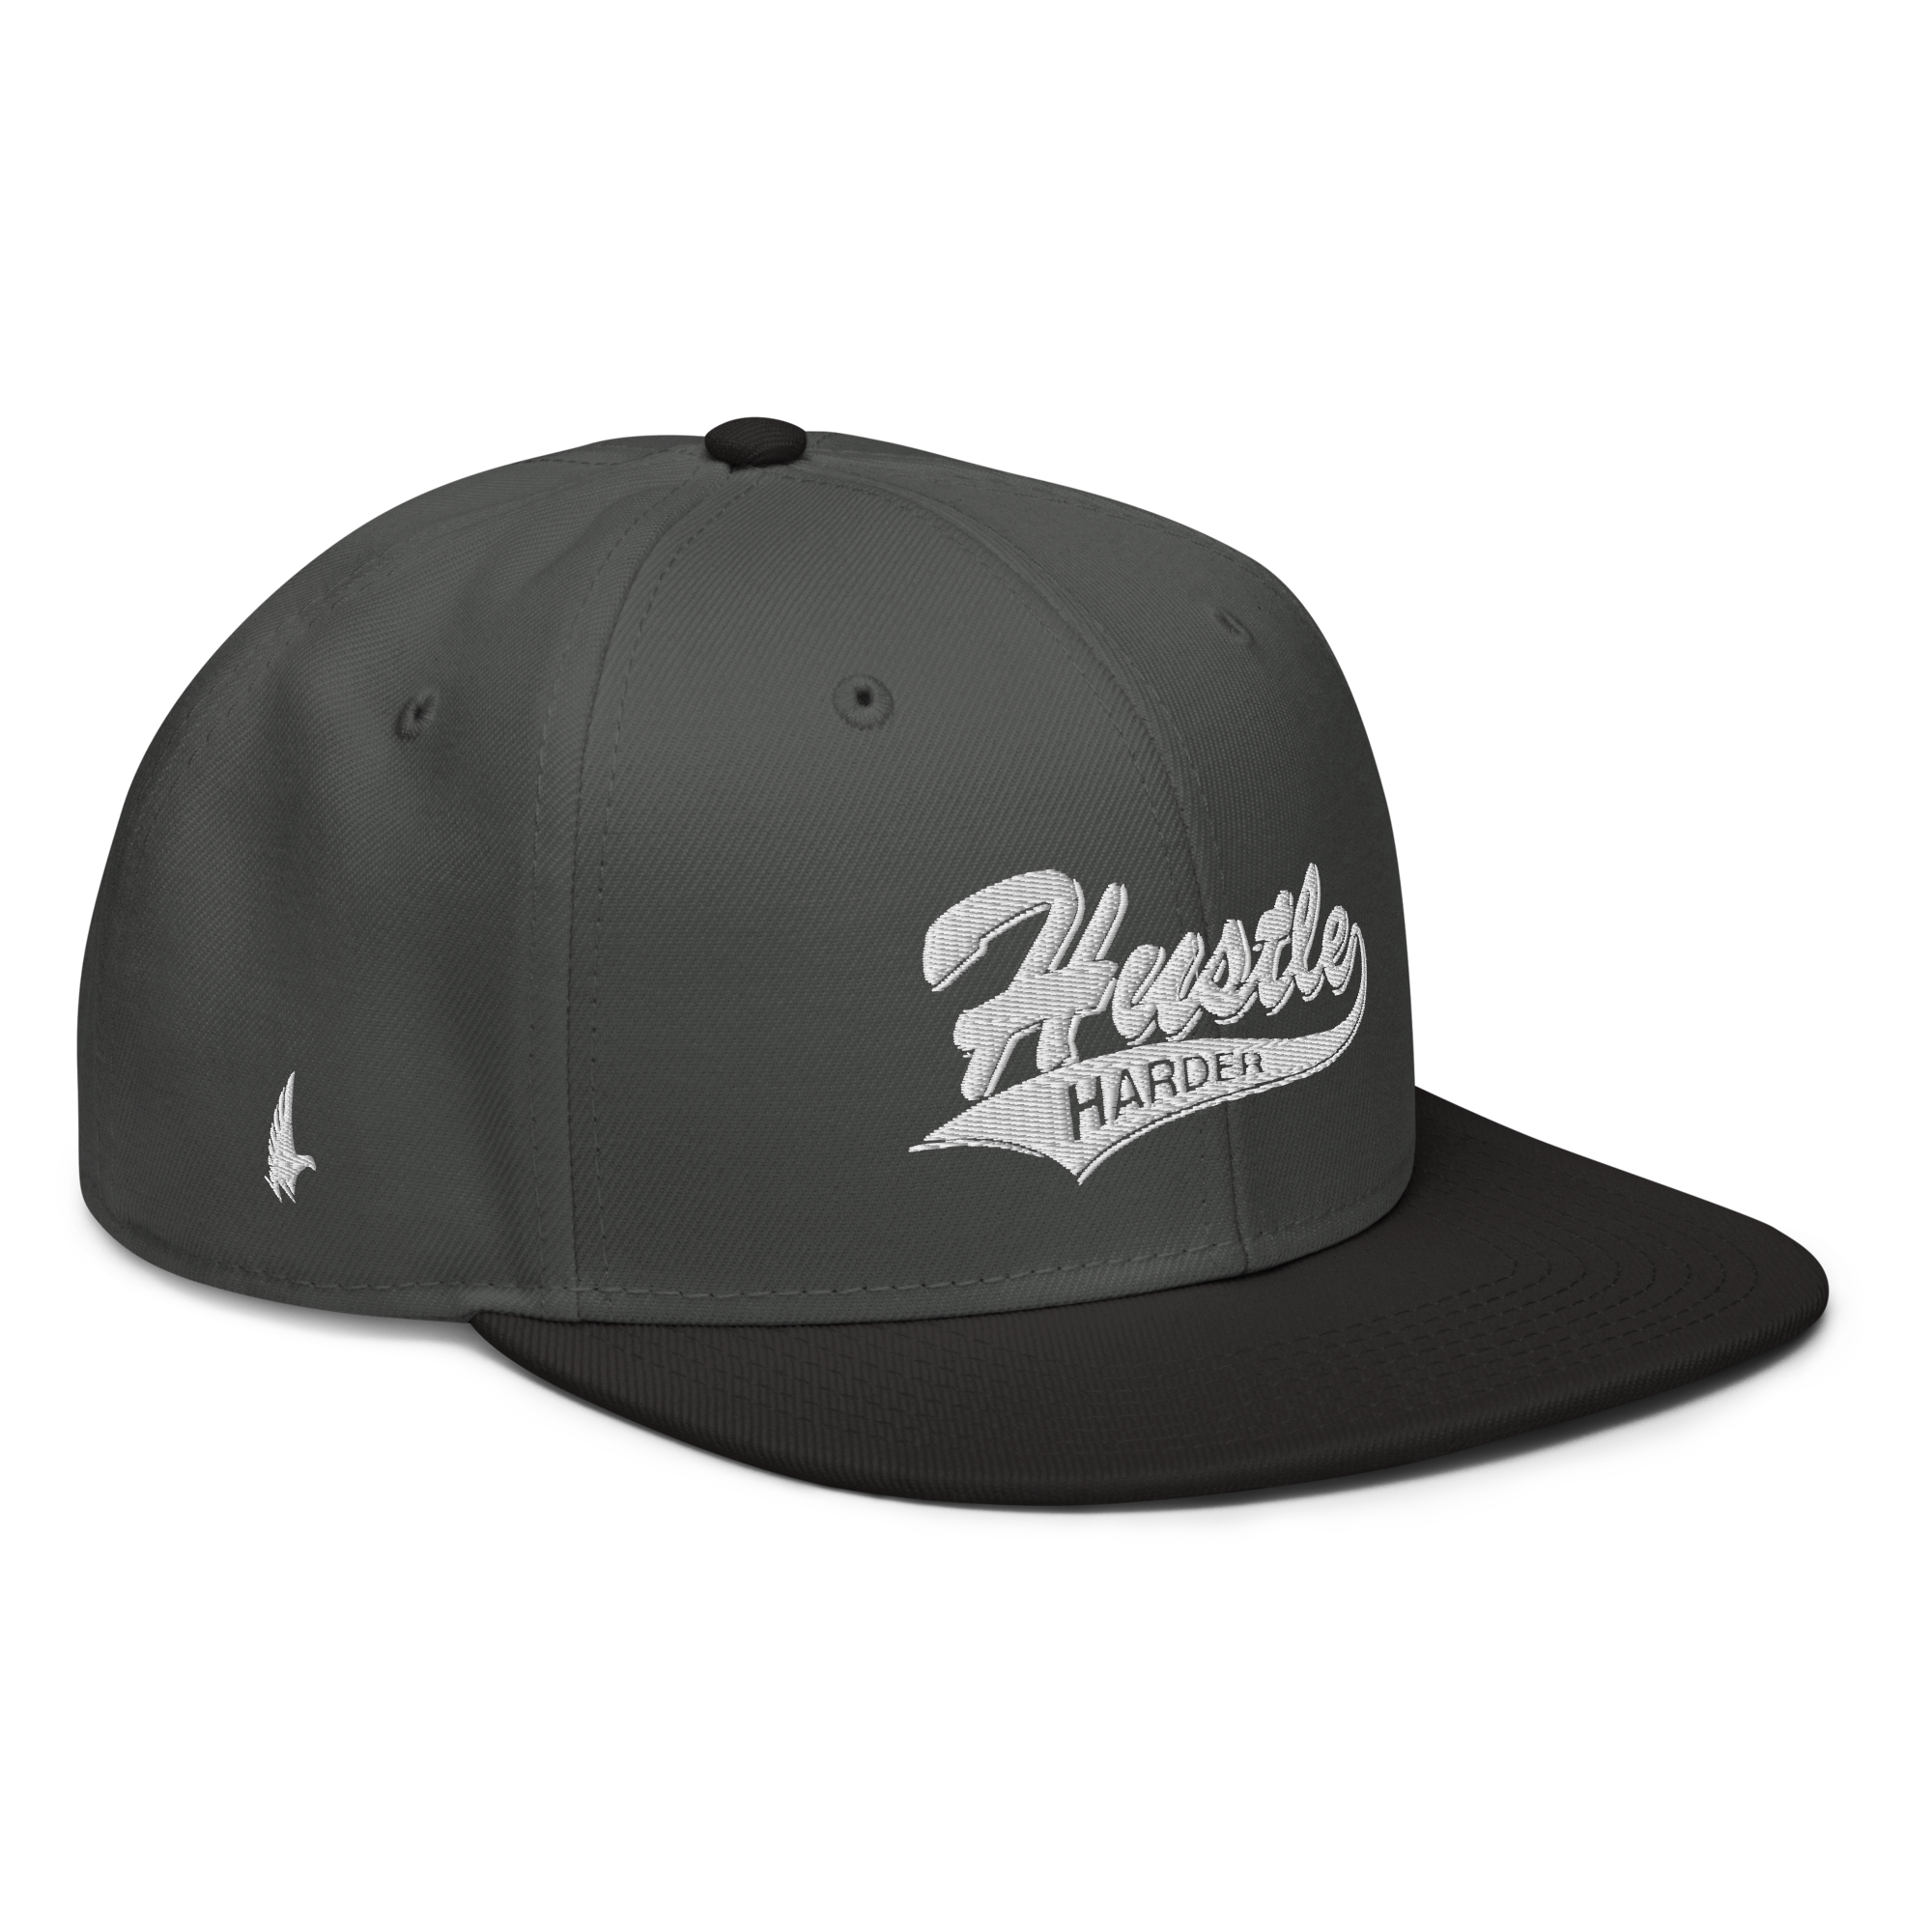 Hustle Harder Snapback Hat Charcoal Gray / White OS - Loyalty Vibes